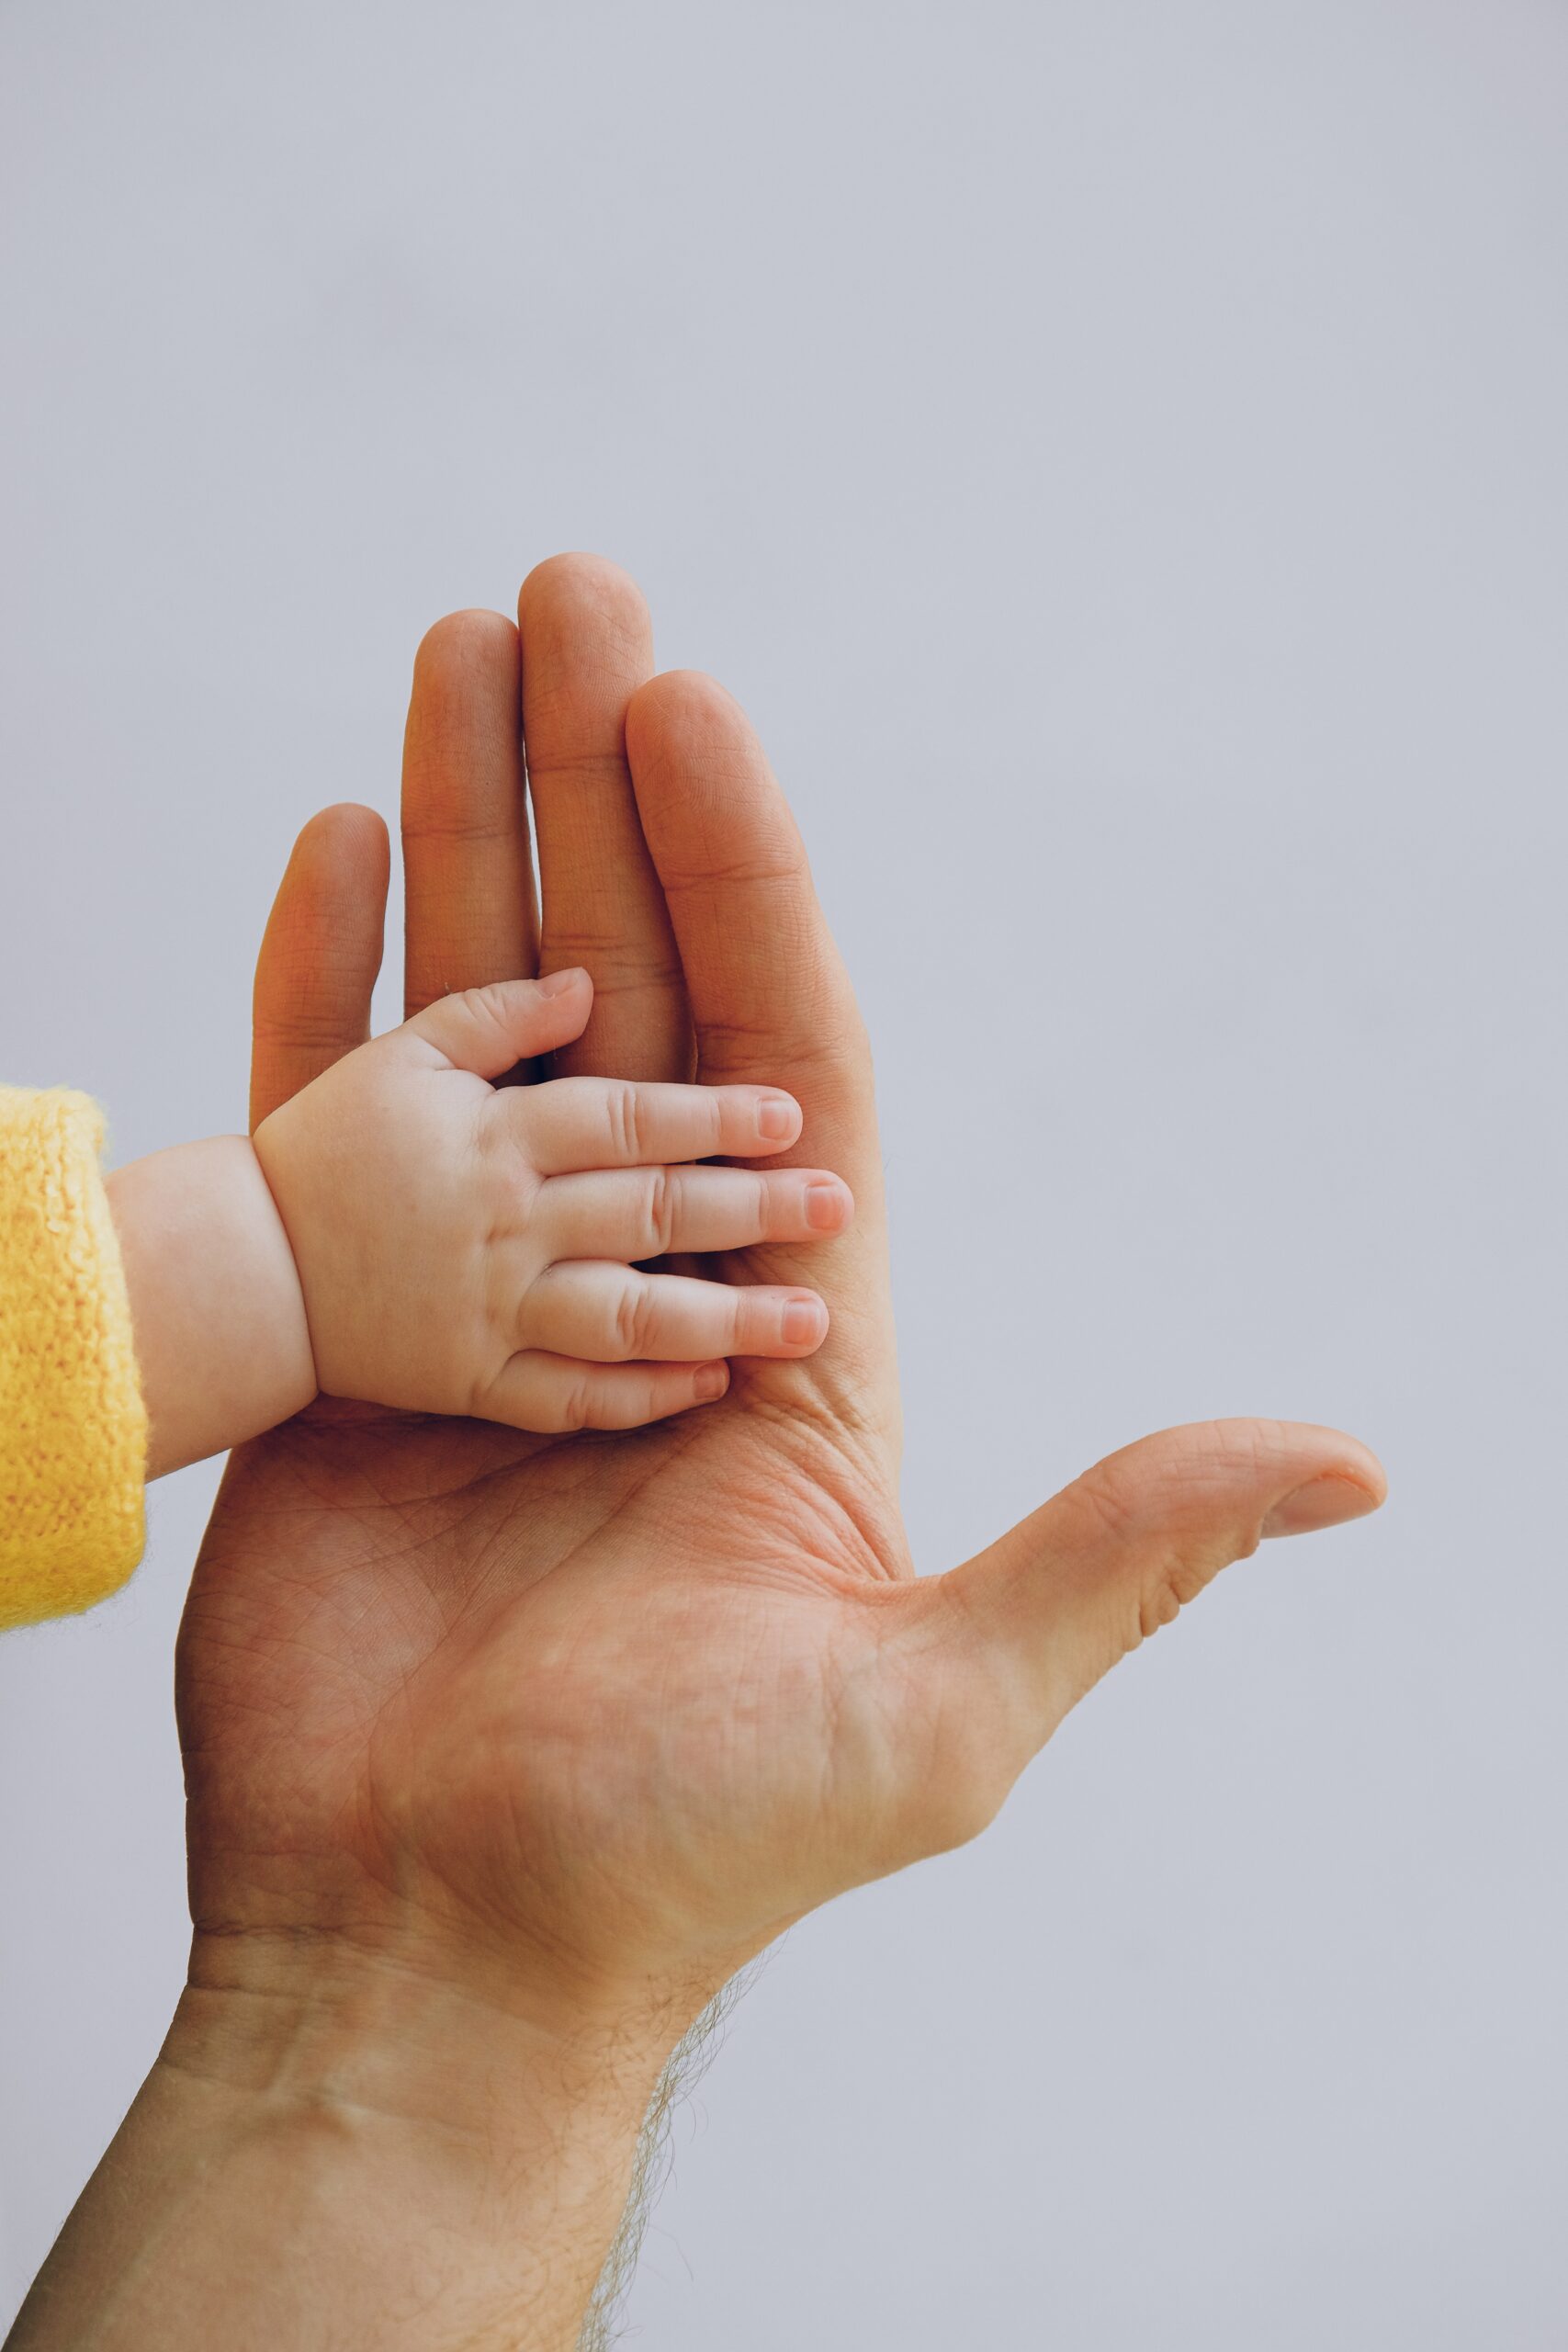 A baby’s hand on another person’s hand image